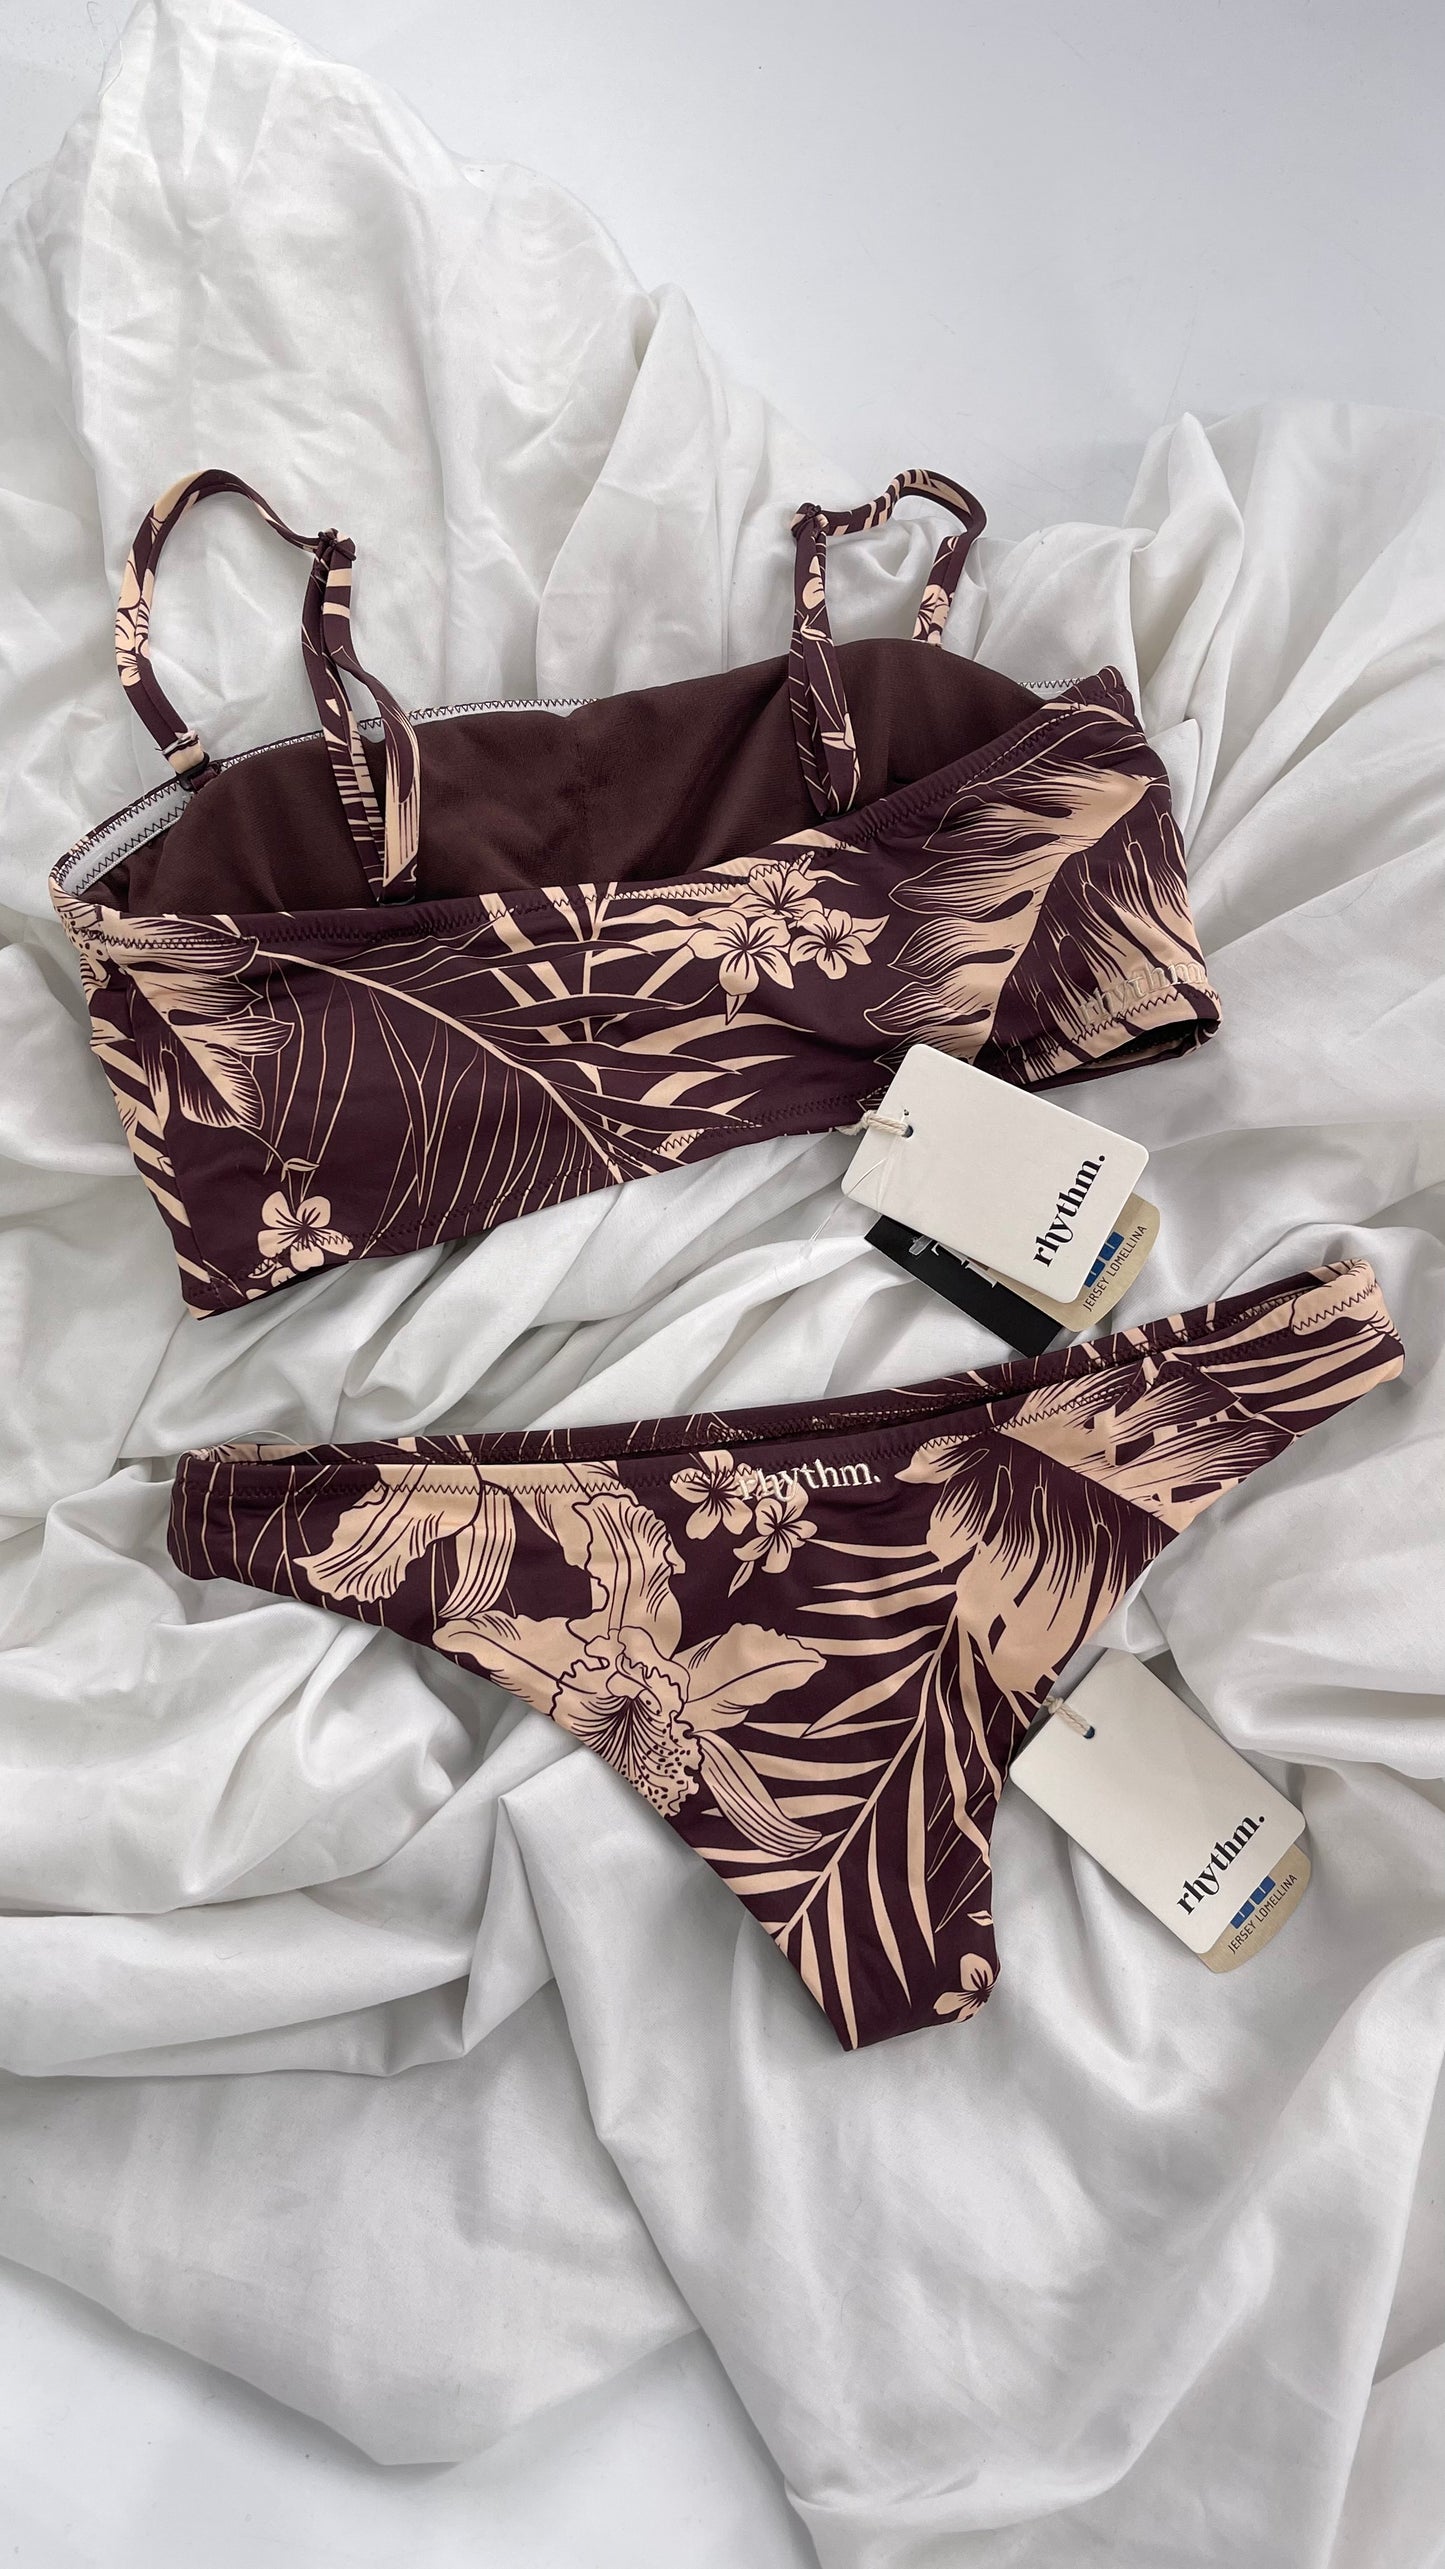 RHYTHM Brown and Beige Tropical Palm Patterned Swim Set with Tags Attached